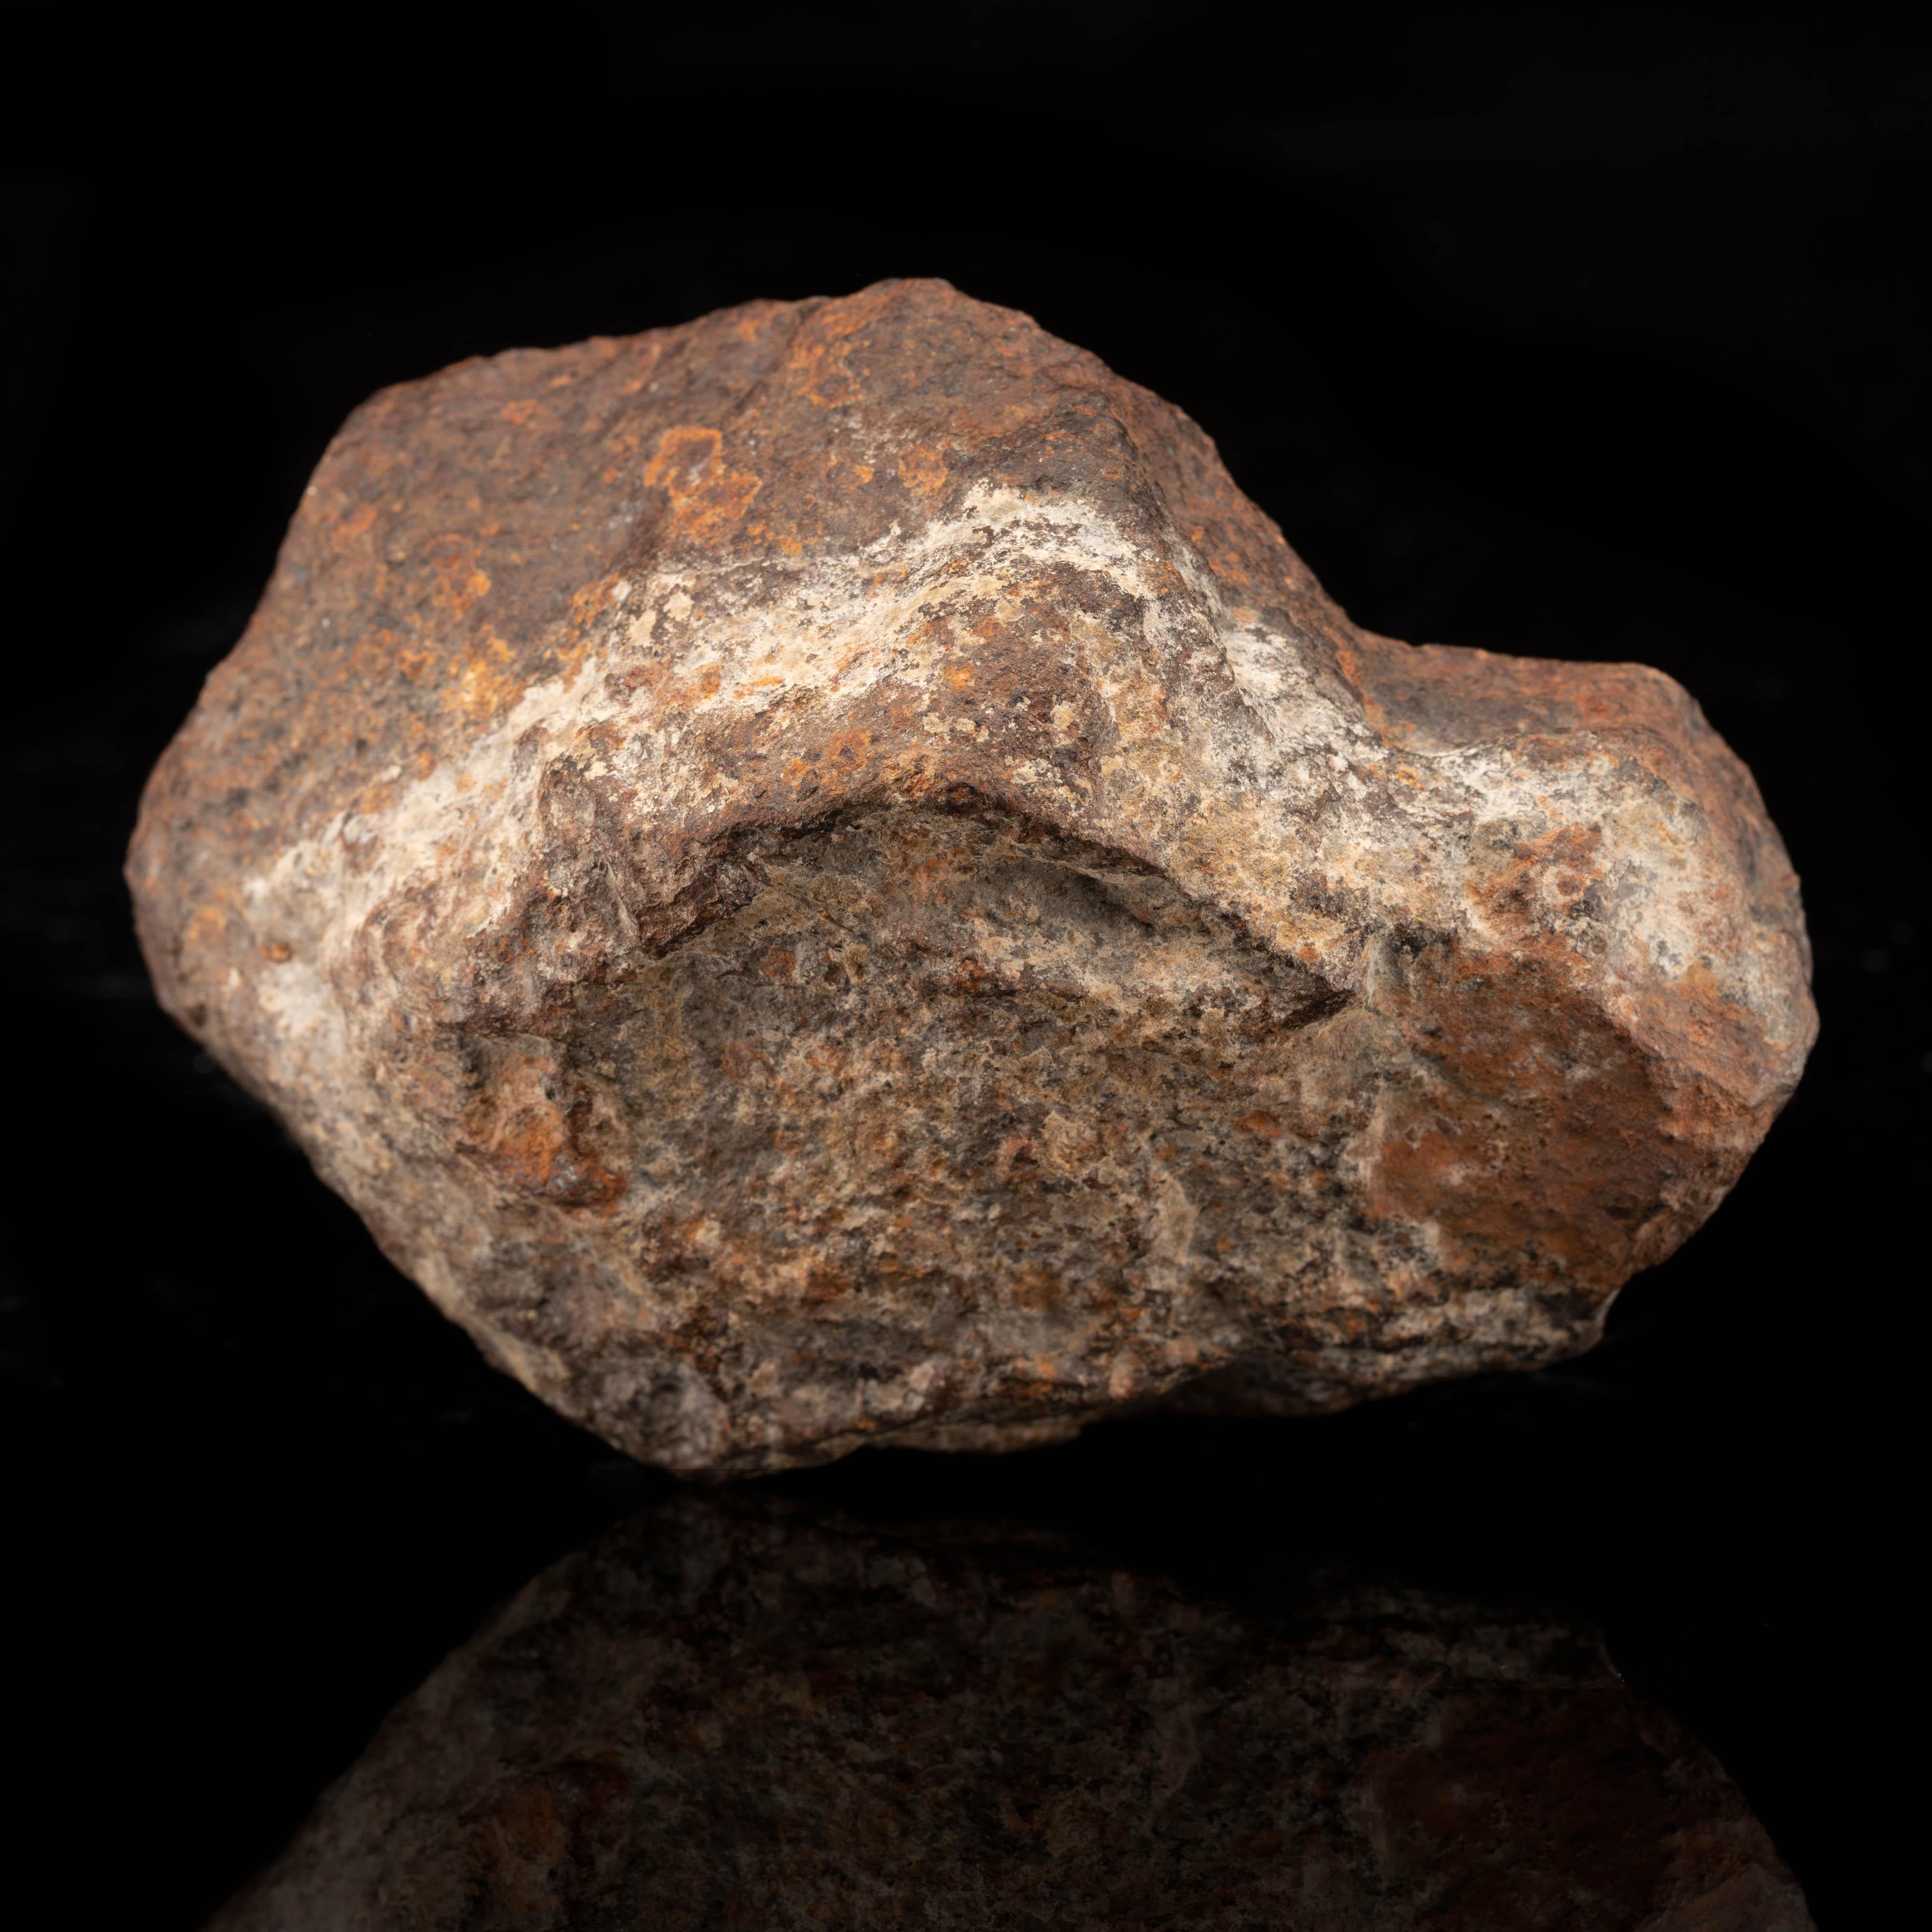 Found in 2002 at Franconia in Mojave, Arizona, this H5 chondrite meteorite can be found strewn amongst many other varieties of metorite in what has been coined a Dense Collection Area.

Comes with Certificate of Authenticity.

Dimensions: 4